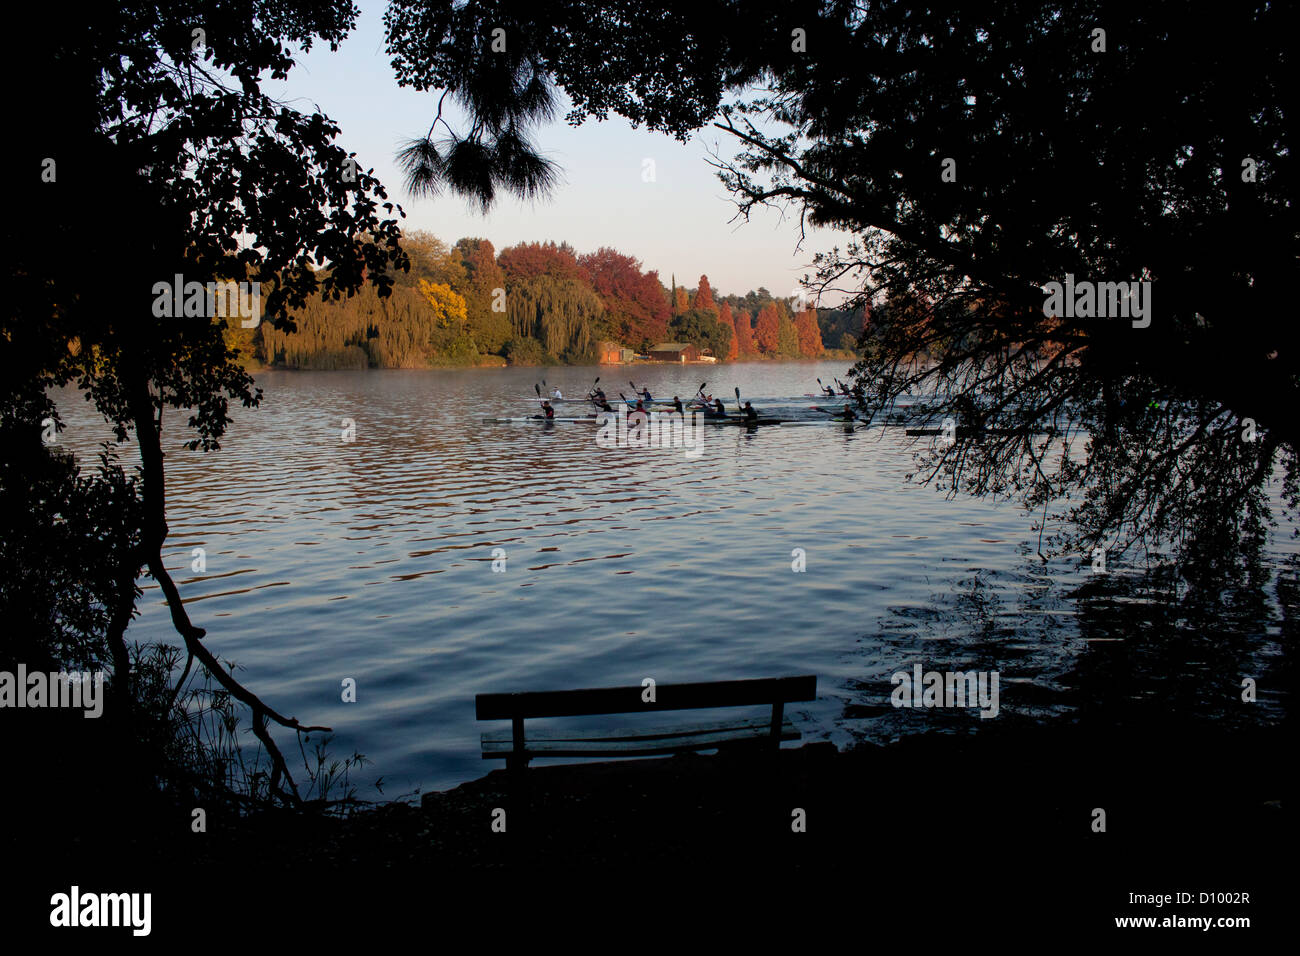 Rowers in kayaks on lake in autumn Africa Stock Photo